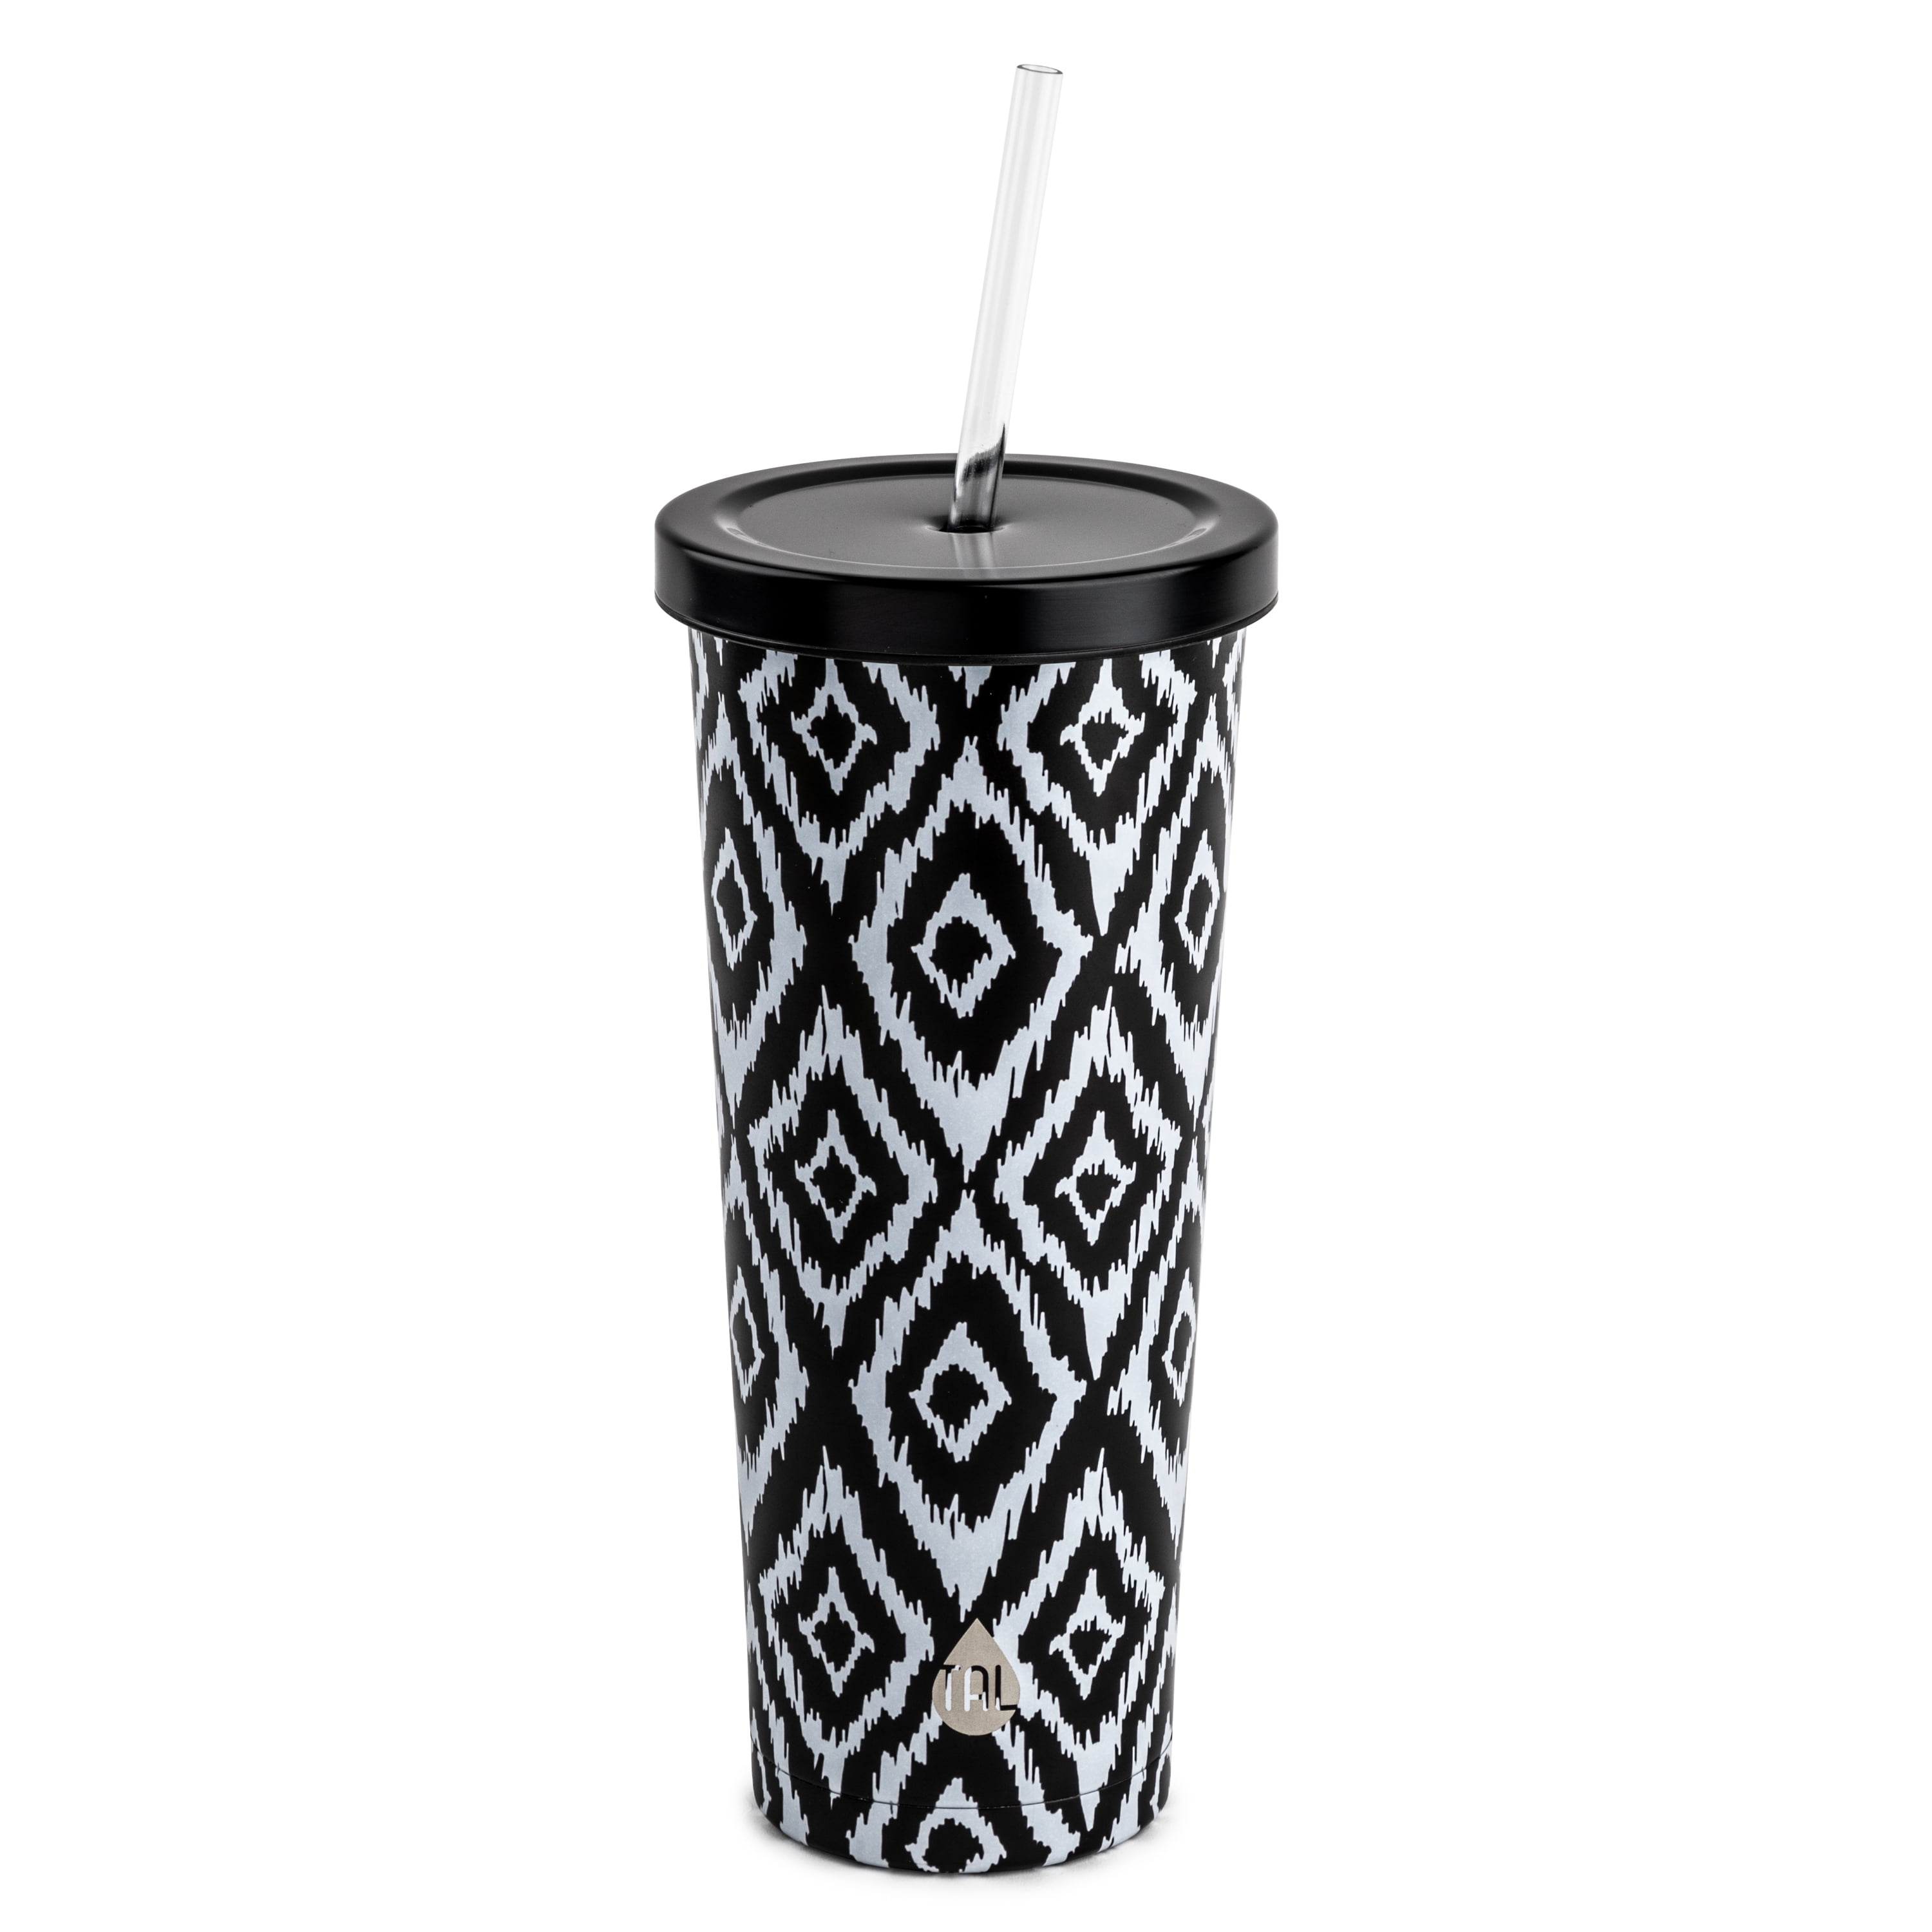 CH STARBUCKS 【Skiing Edition】 Contigo Cool Black Dragon Sports Stainless  Steel Thermos Tumbler Cup with Cup Holder 600ml 